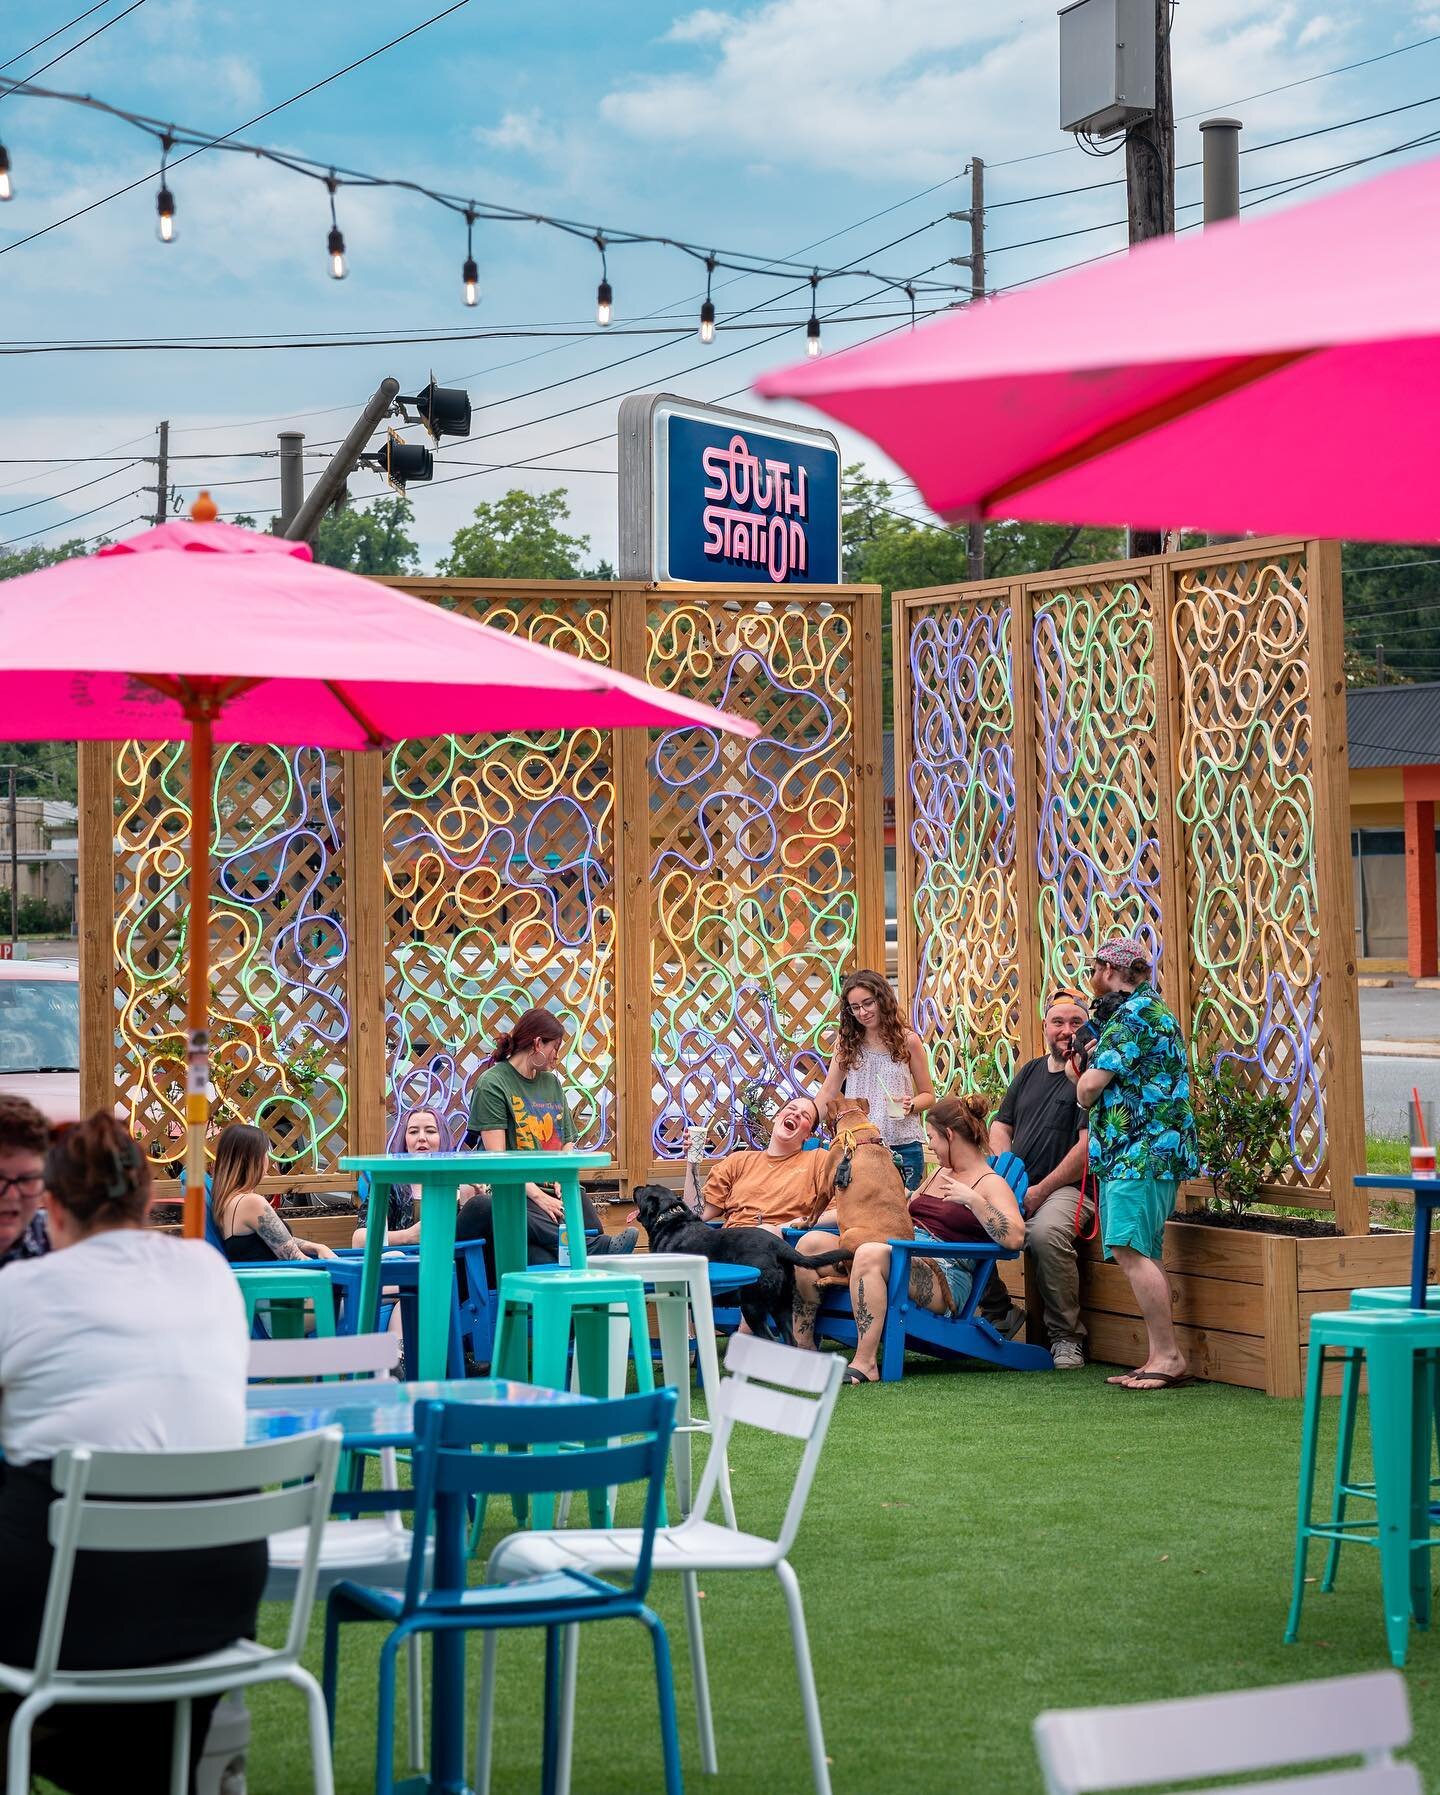 We&rsquo;re loving the patio vibes at our new sister bar &amp; restaurant @southstationtlh! Delicious food, amazing cocktails, refreshing slushees, games, a big outdoor lawn, and most importantly FUN. It&rsquo;s the perfect new hangout spot 😍

Hang 